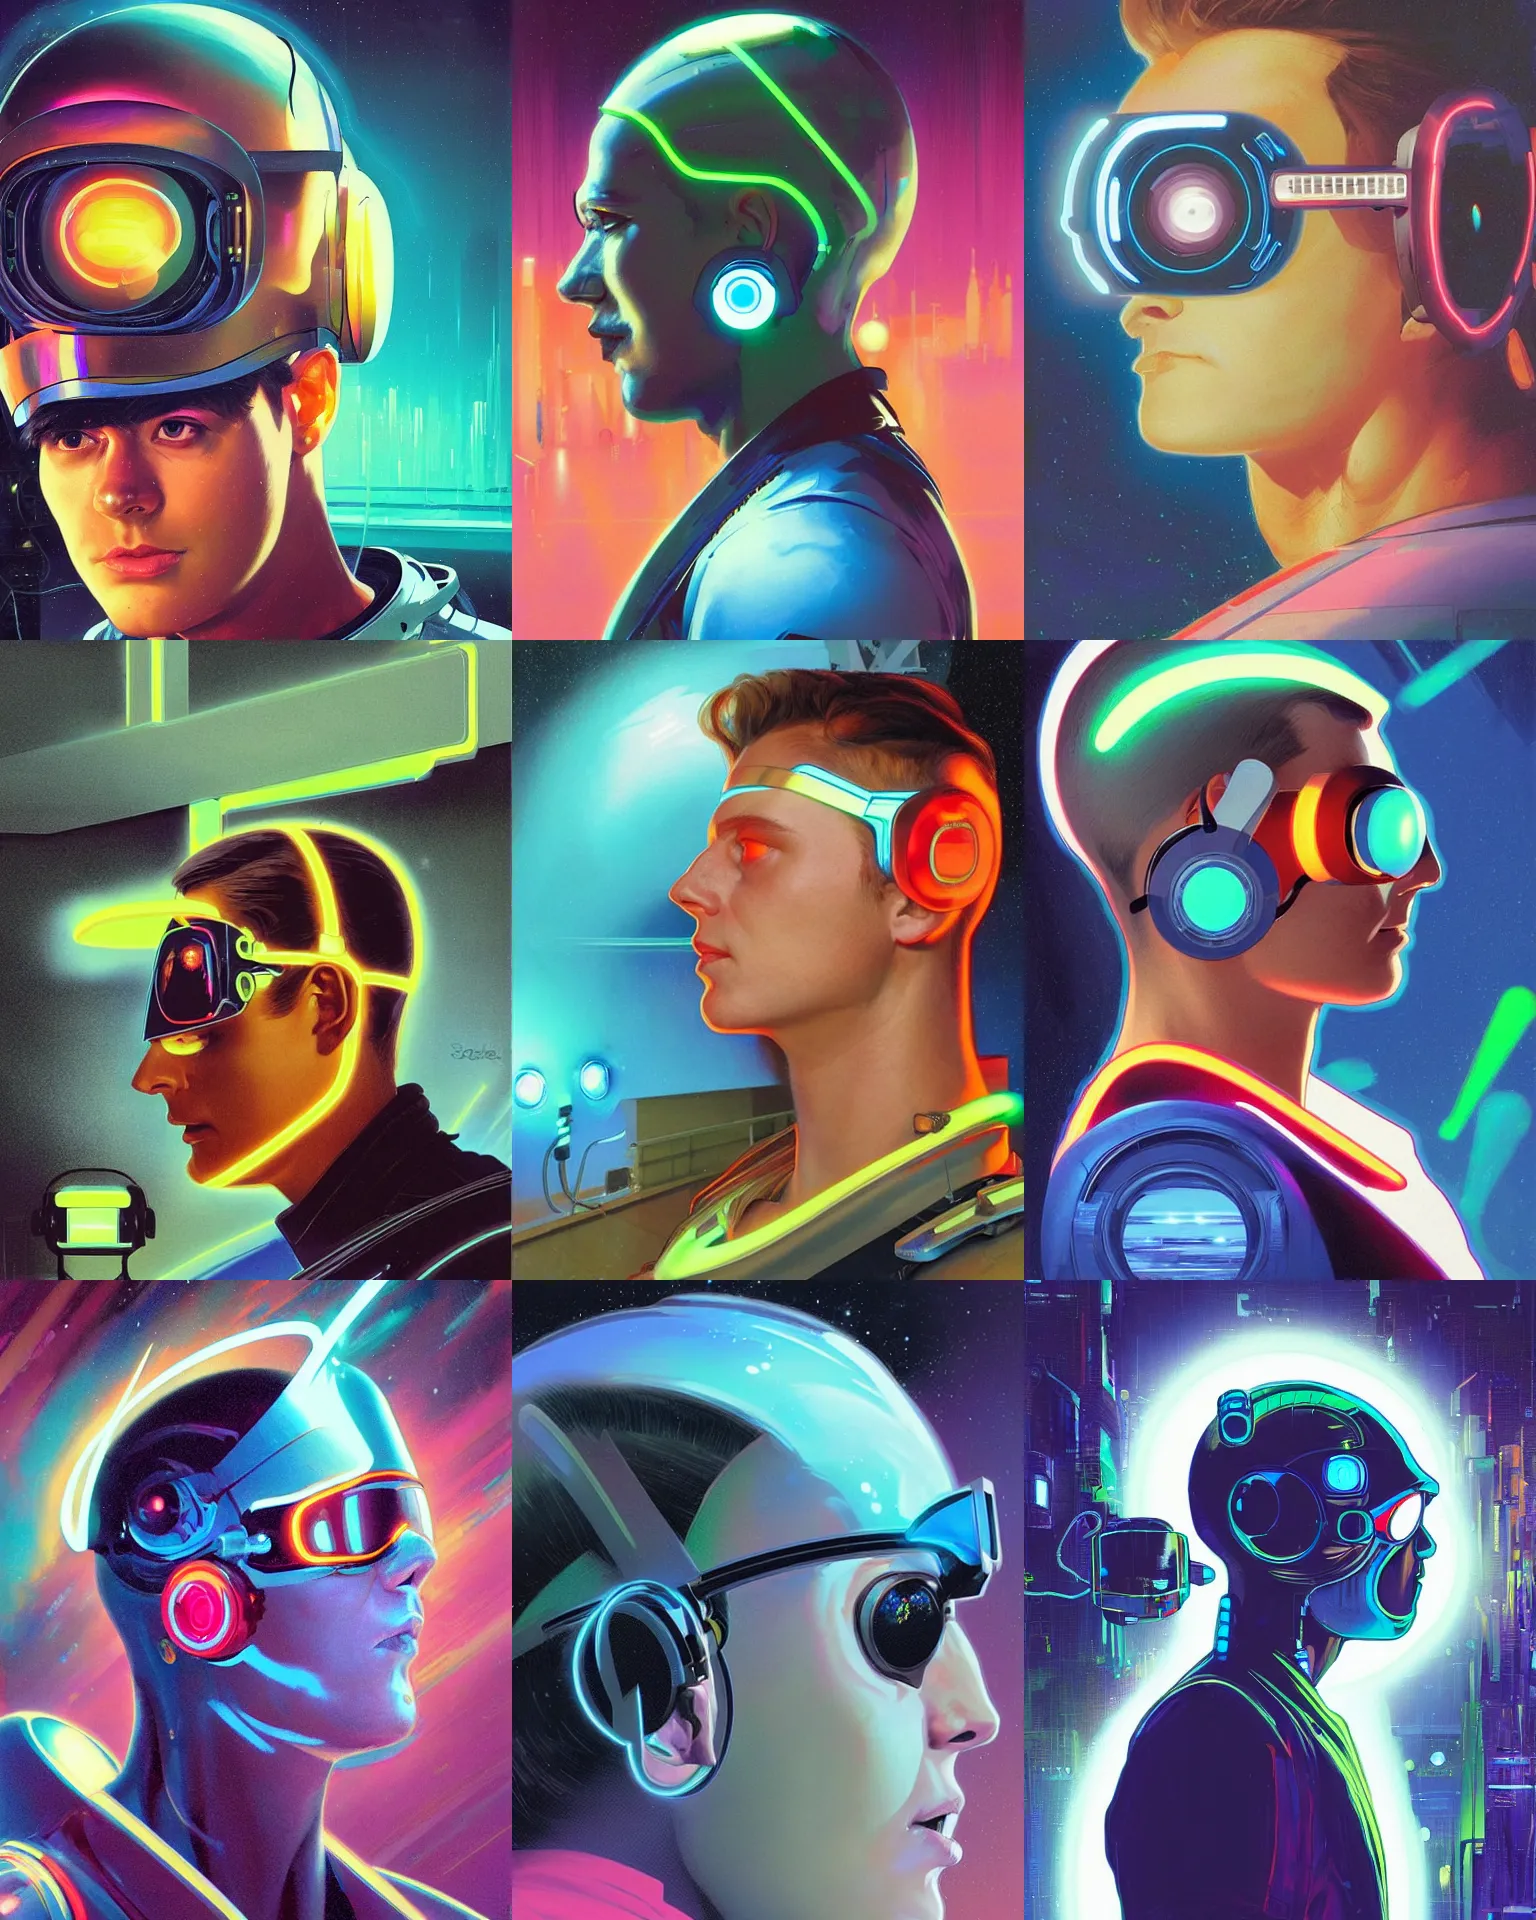 Prompt: side view future coder man, sleek cyclops display over eyes and glowing headset, neon accents, holographic colors, desaturated headshot portrait digital painting by john berkey, tom whalen, alex grey, alphonse mucha, donoto giancola, dean cornwall, rhads, astronaut cyberpunk electric lights profile